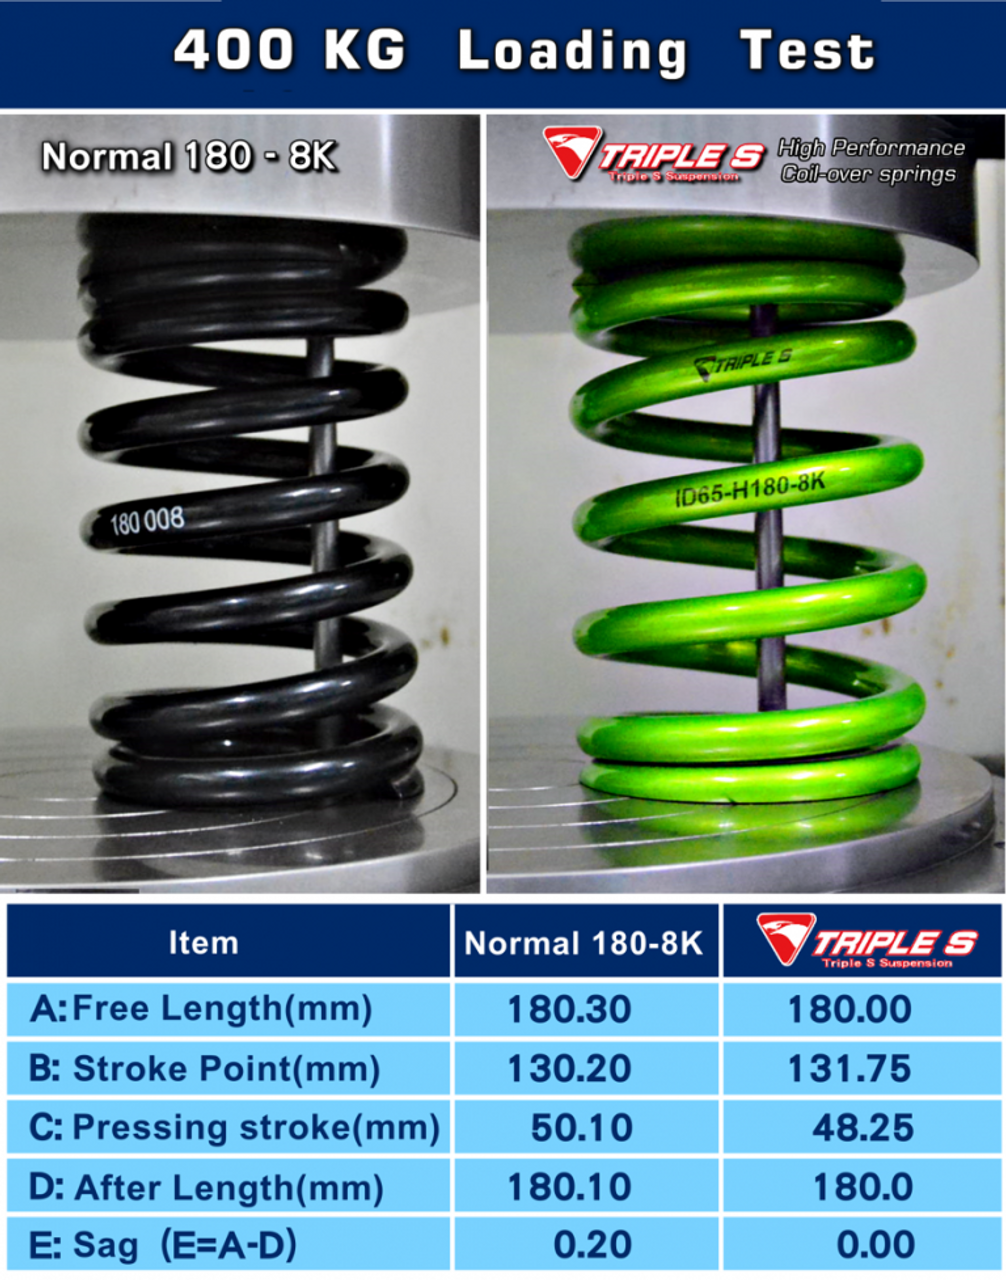 TOYOTA CAMRY (91-97) ISC V2 BASIC COILOVER SUSPENSION
Front Triple S Spring Upgrade - Rear Triple S Spring Upgrade 
Street Comfort/Sport Suggested Spring Rates